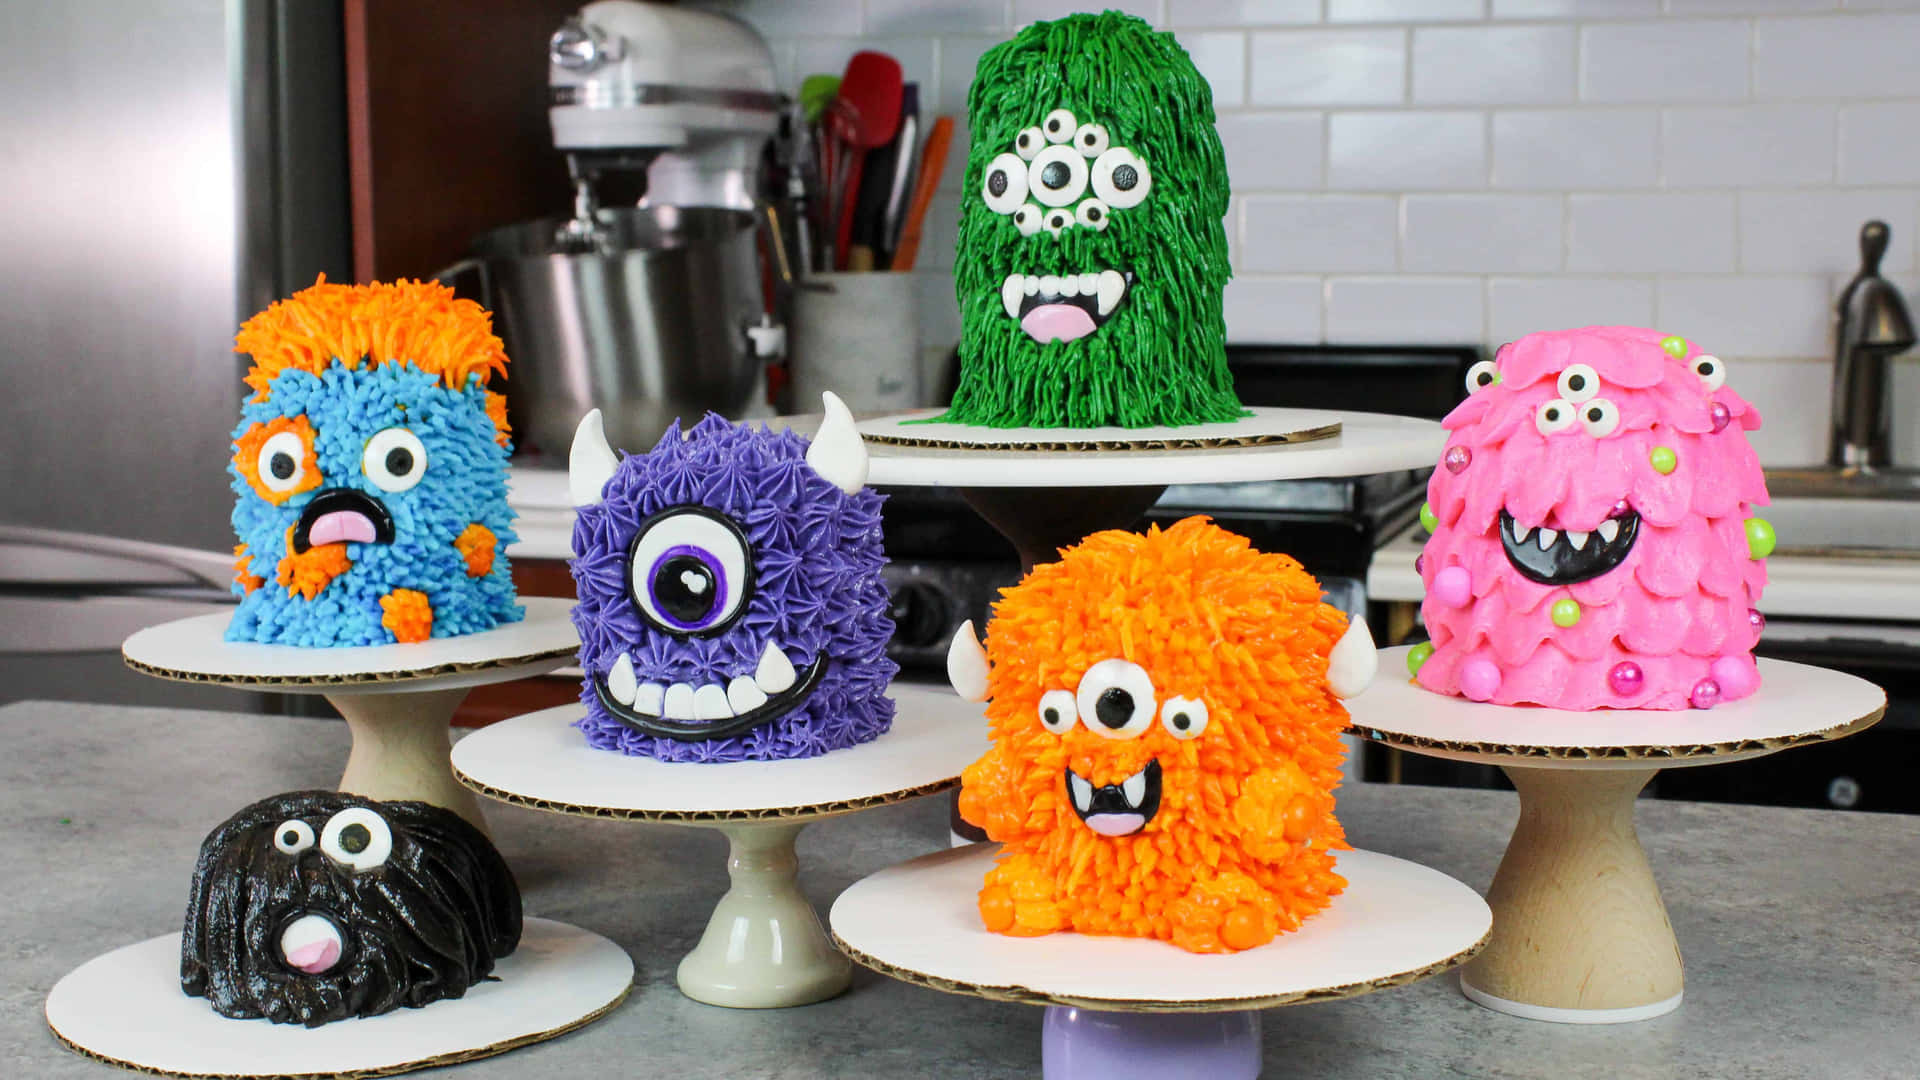 A Group Of Cakes With Monster Faces On Them